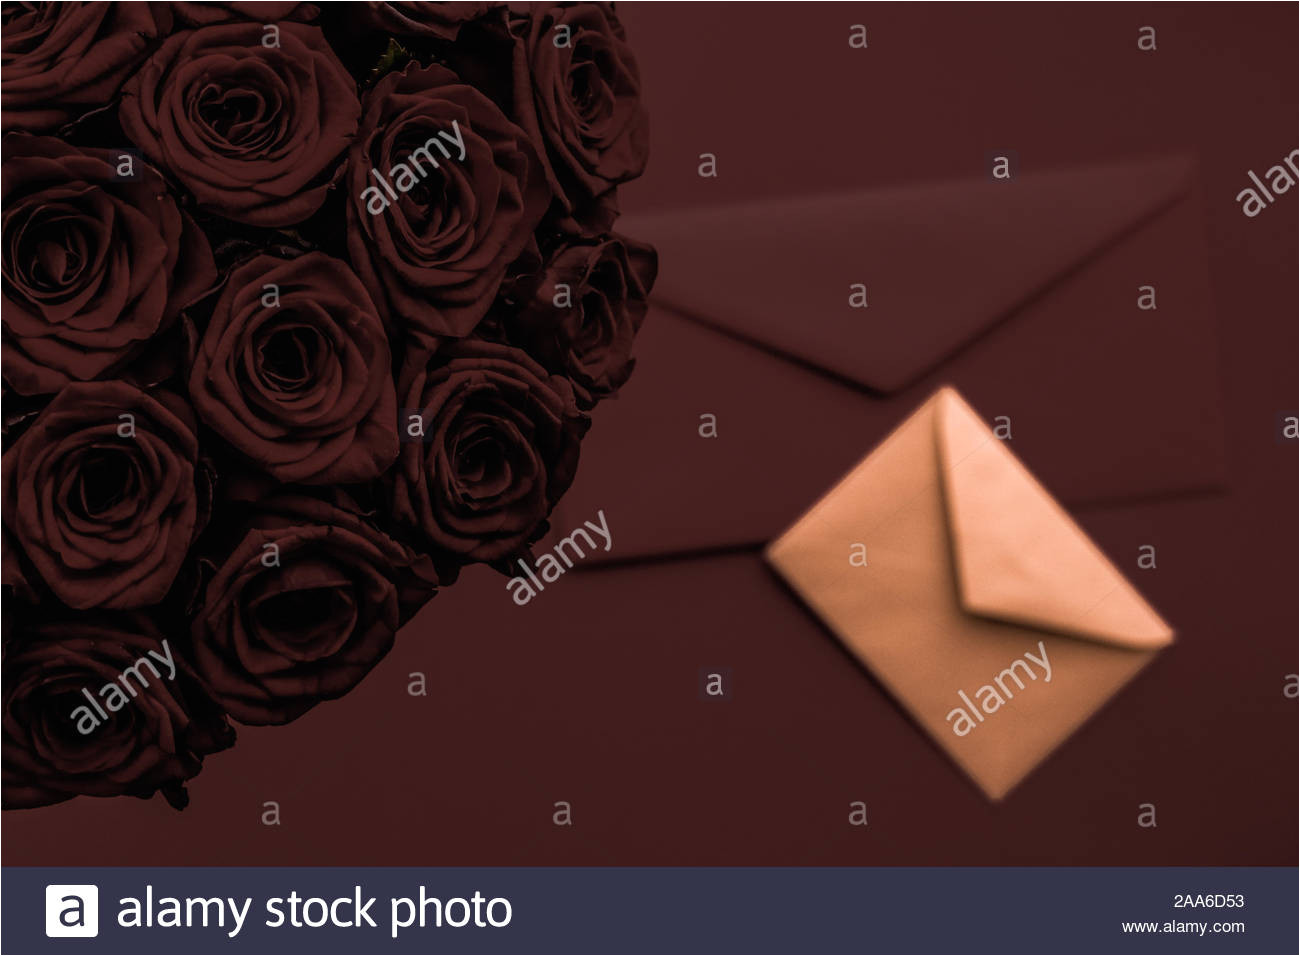 holidays gift floral present and happy relationship concept love letter and flowers delivery on valentines day luxury bouquet of roses and card on 2aa6d53 jpg